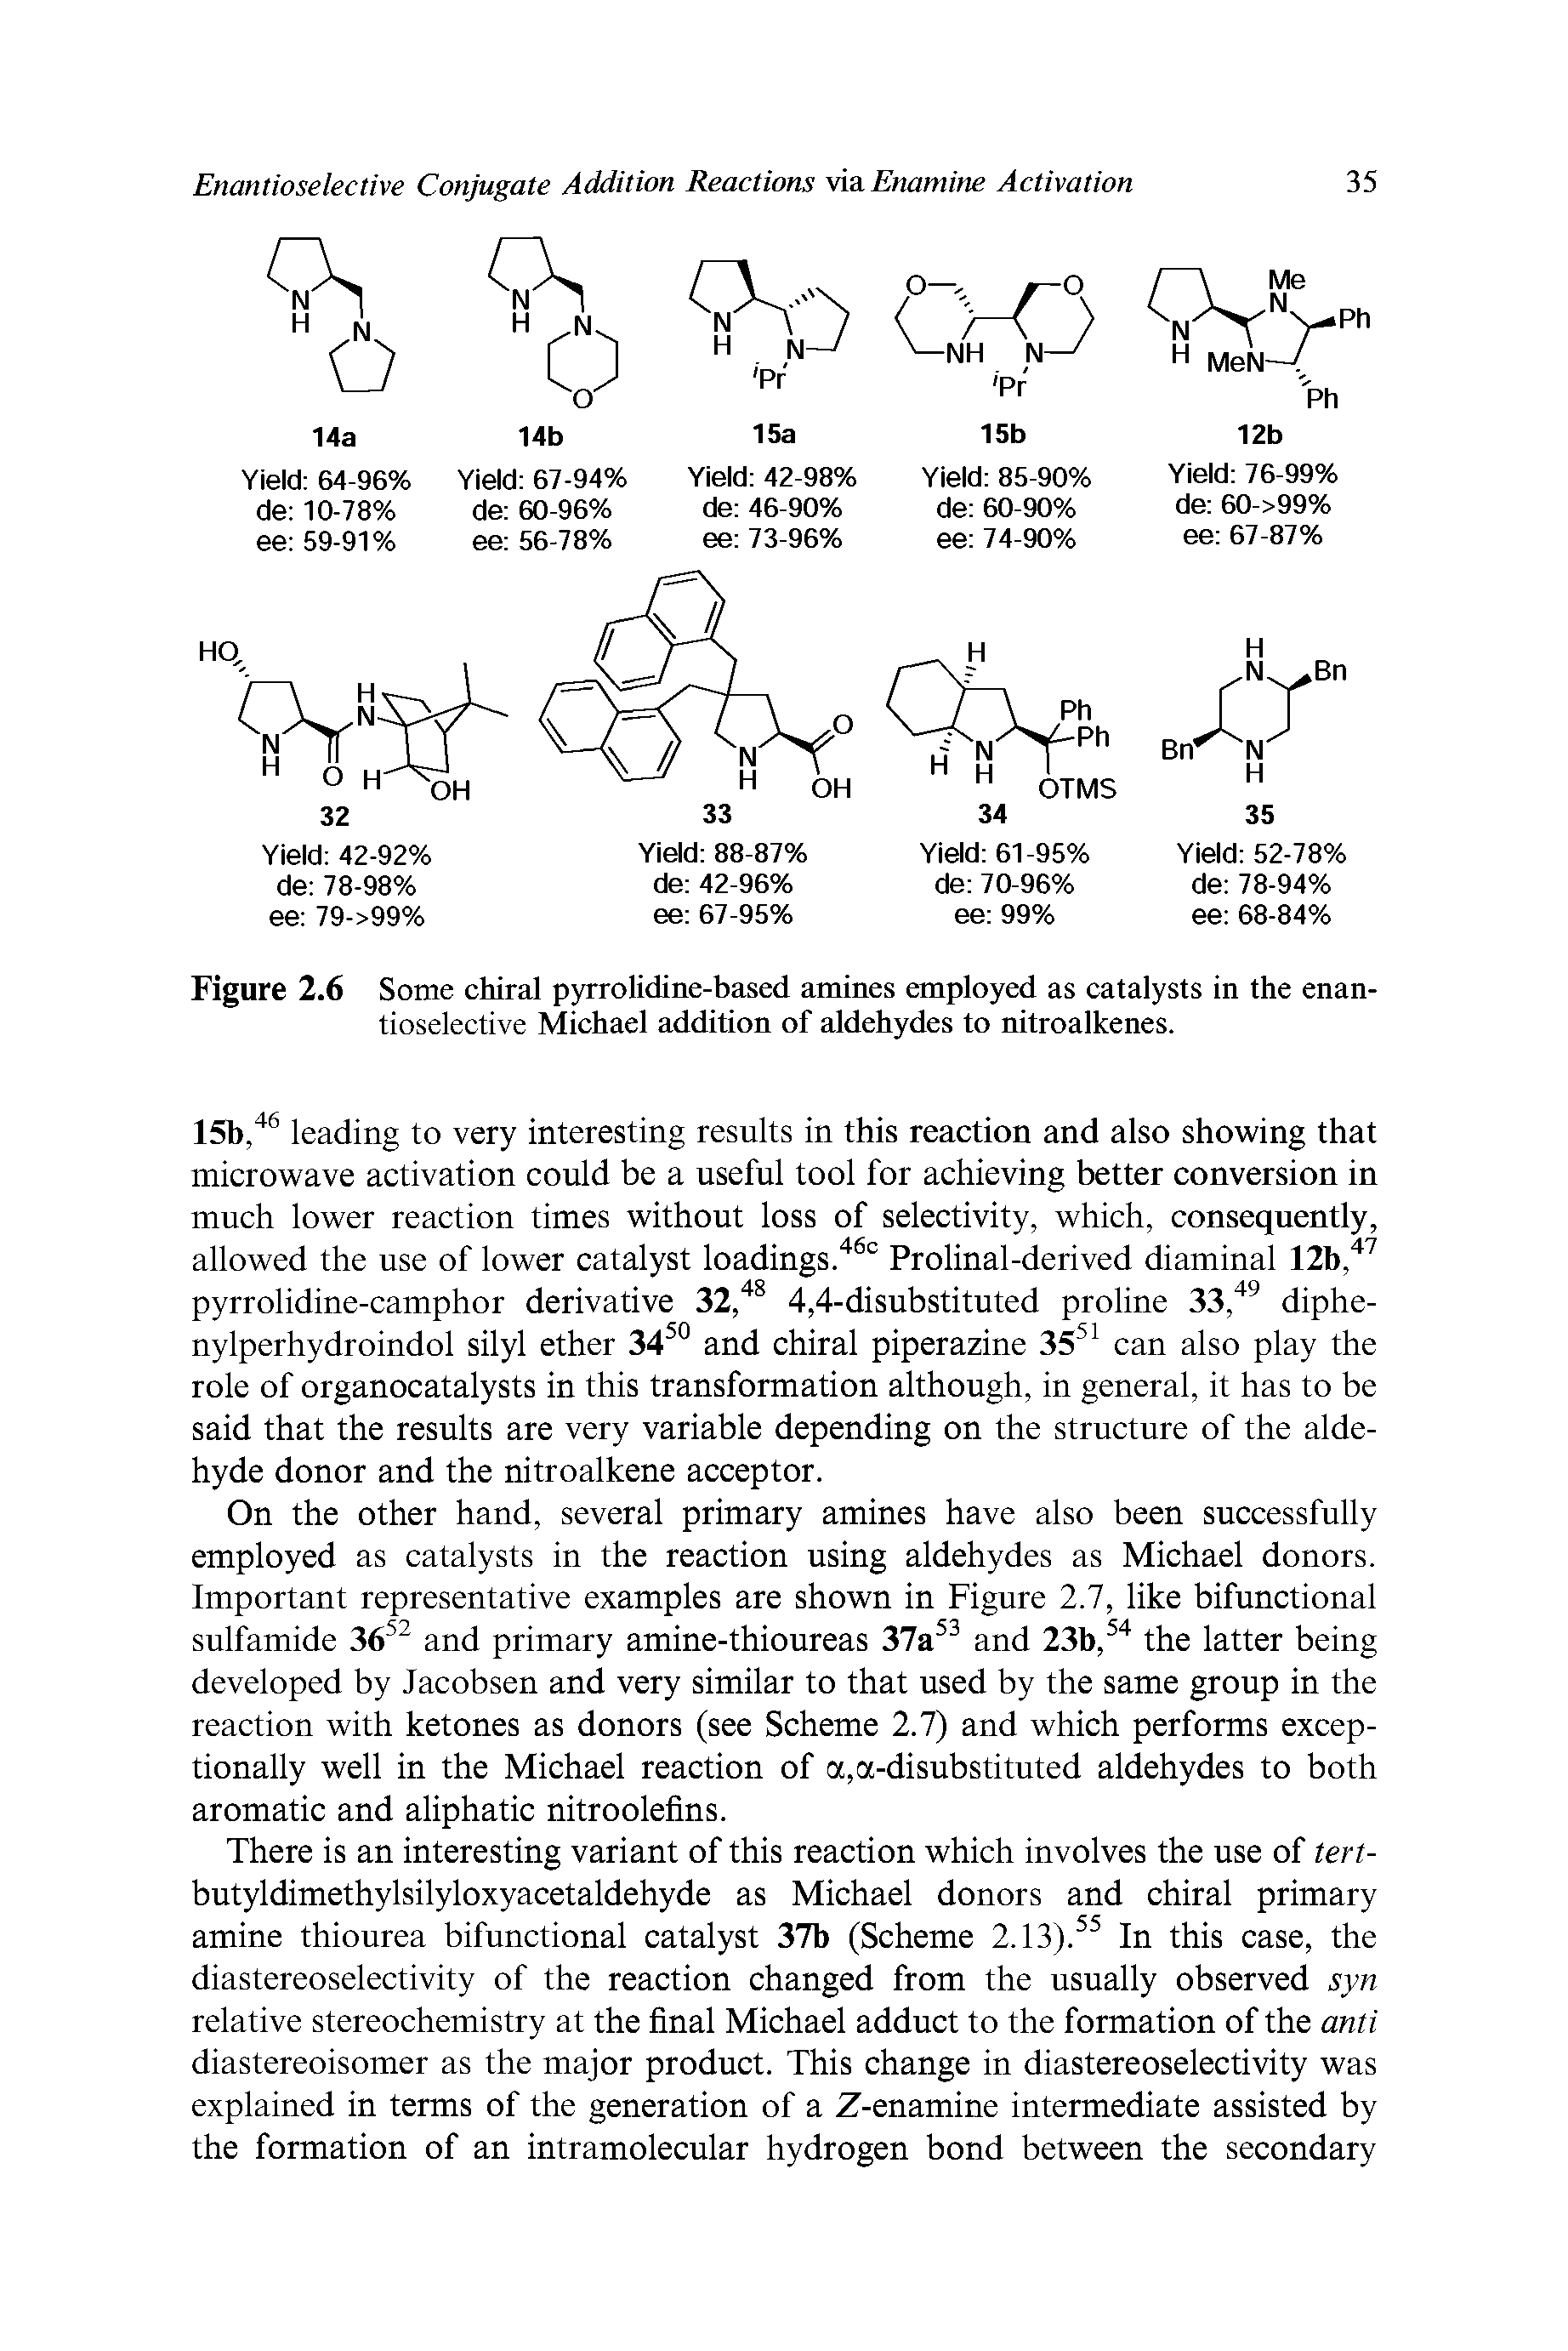 Figure 2.6 Some chiral pyrrolidine-based amines employed as catalysts in the enantioselective Michael addition of aldehydes to nitroalkenes.